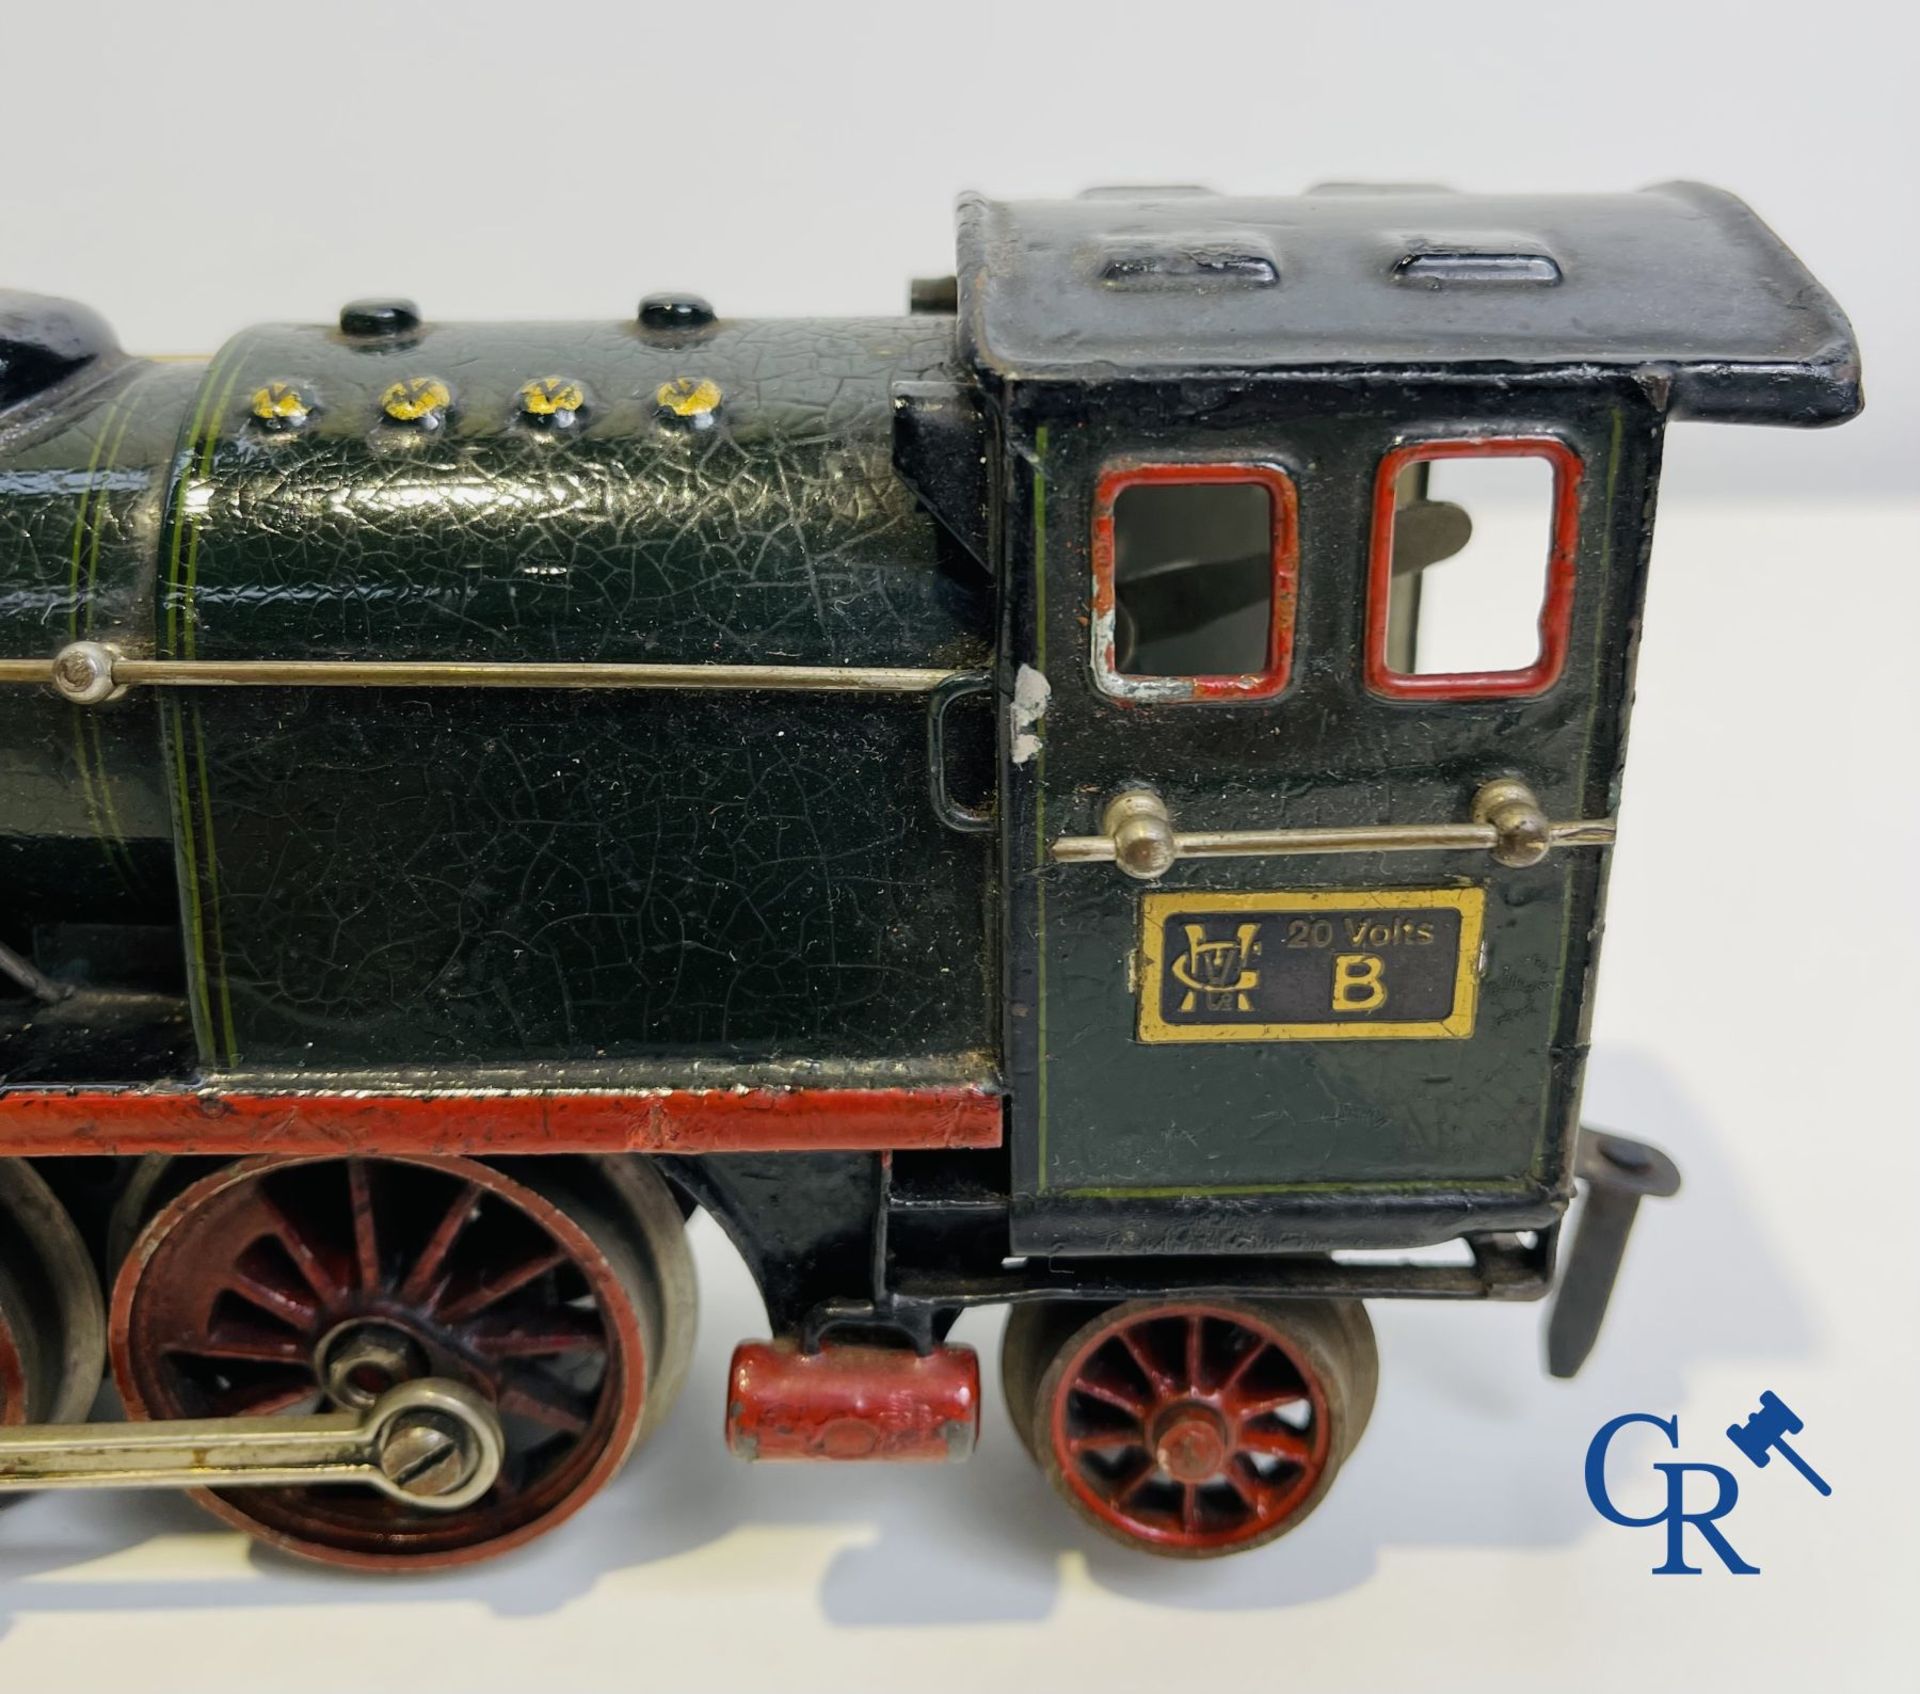 Old toys: Märklin, Locomotive with towing tender and dining car.
About 1930. - Image 3 of 32